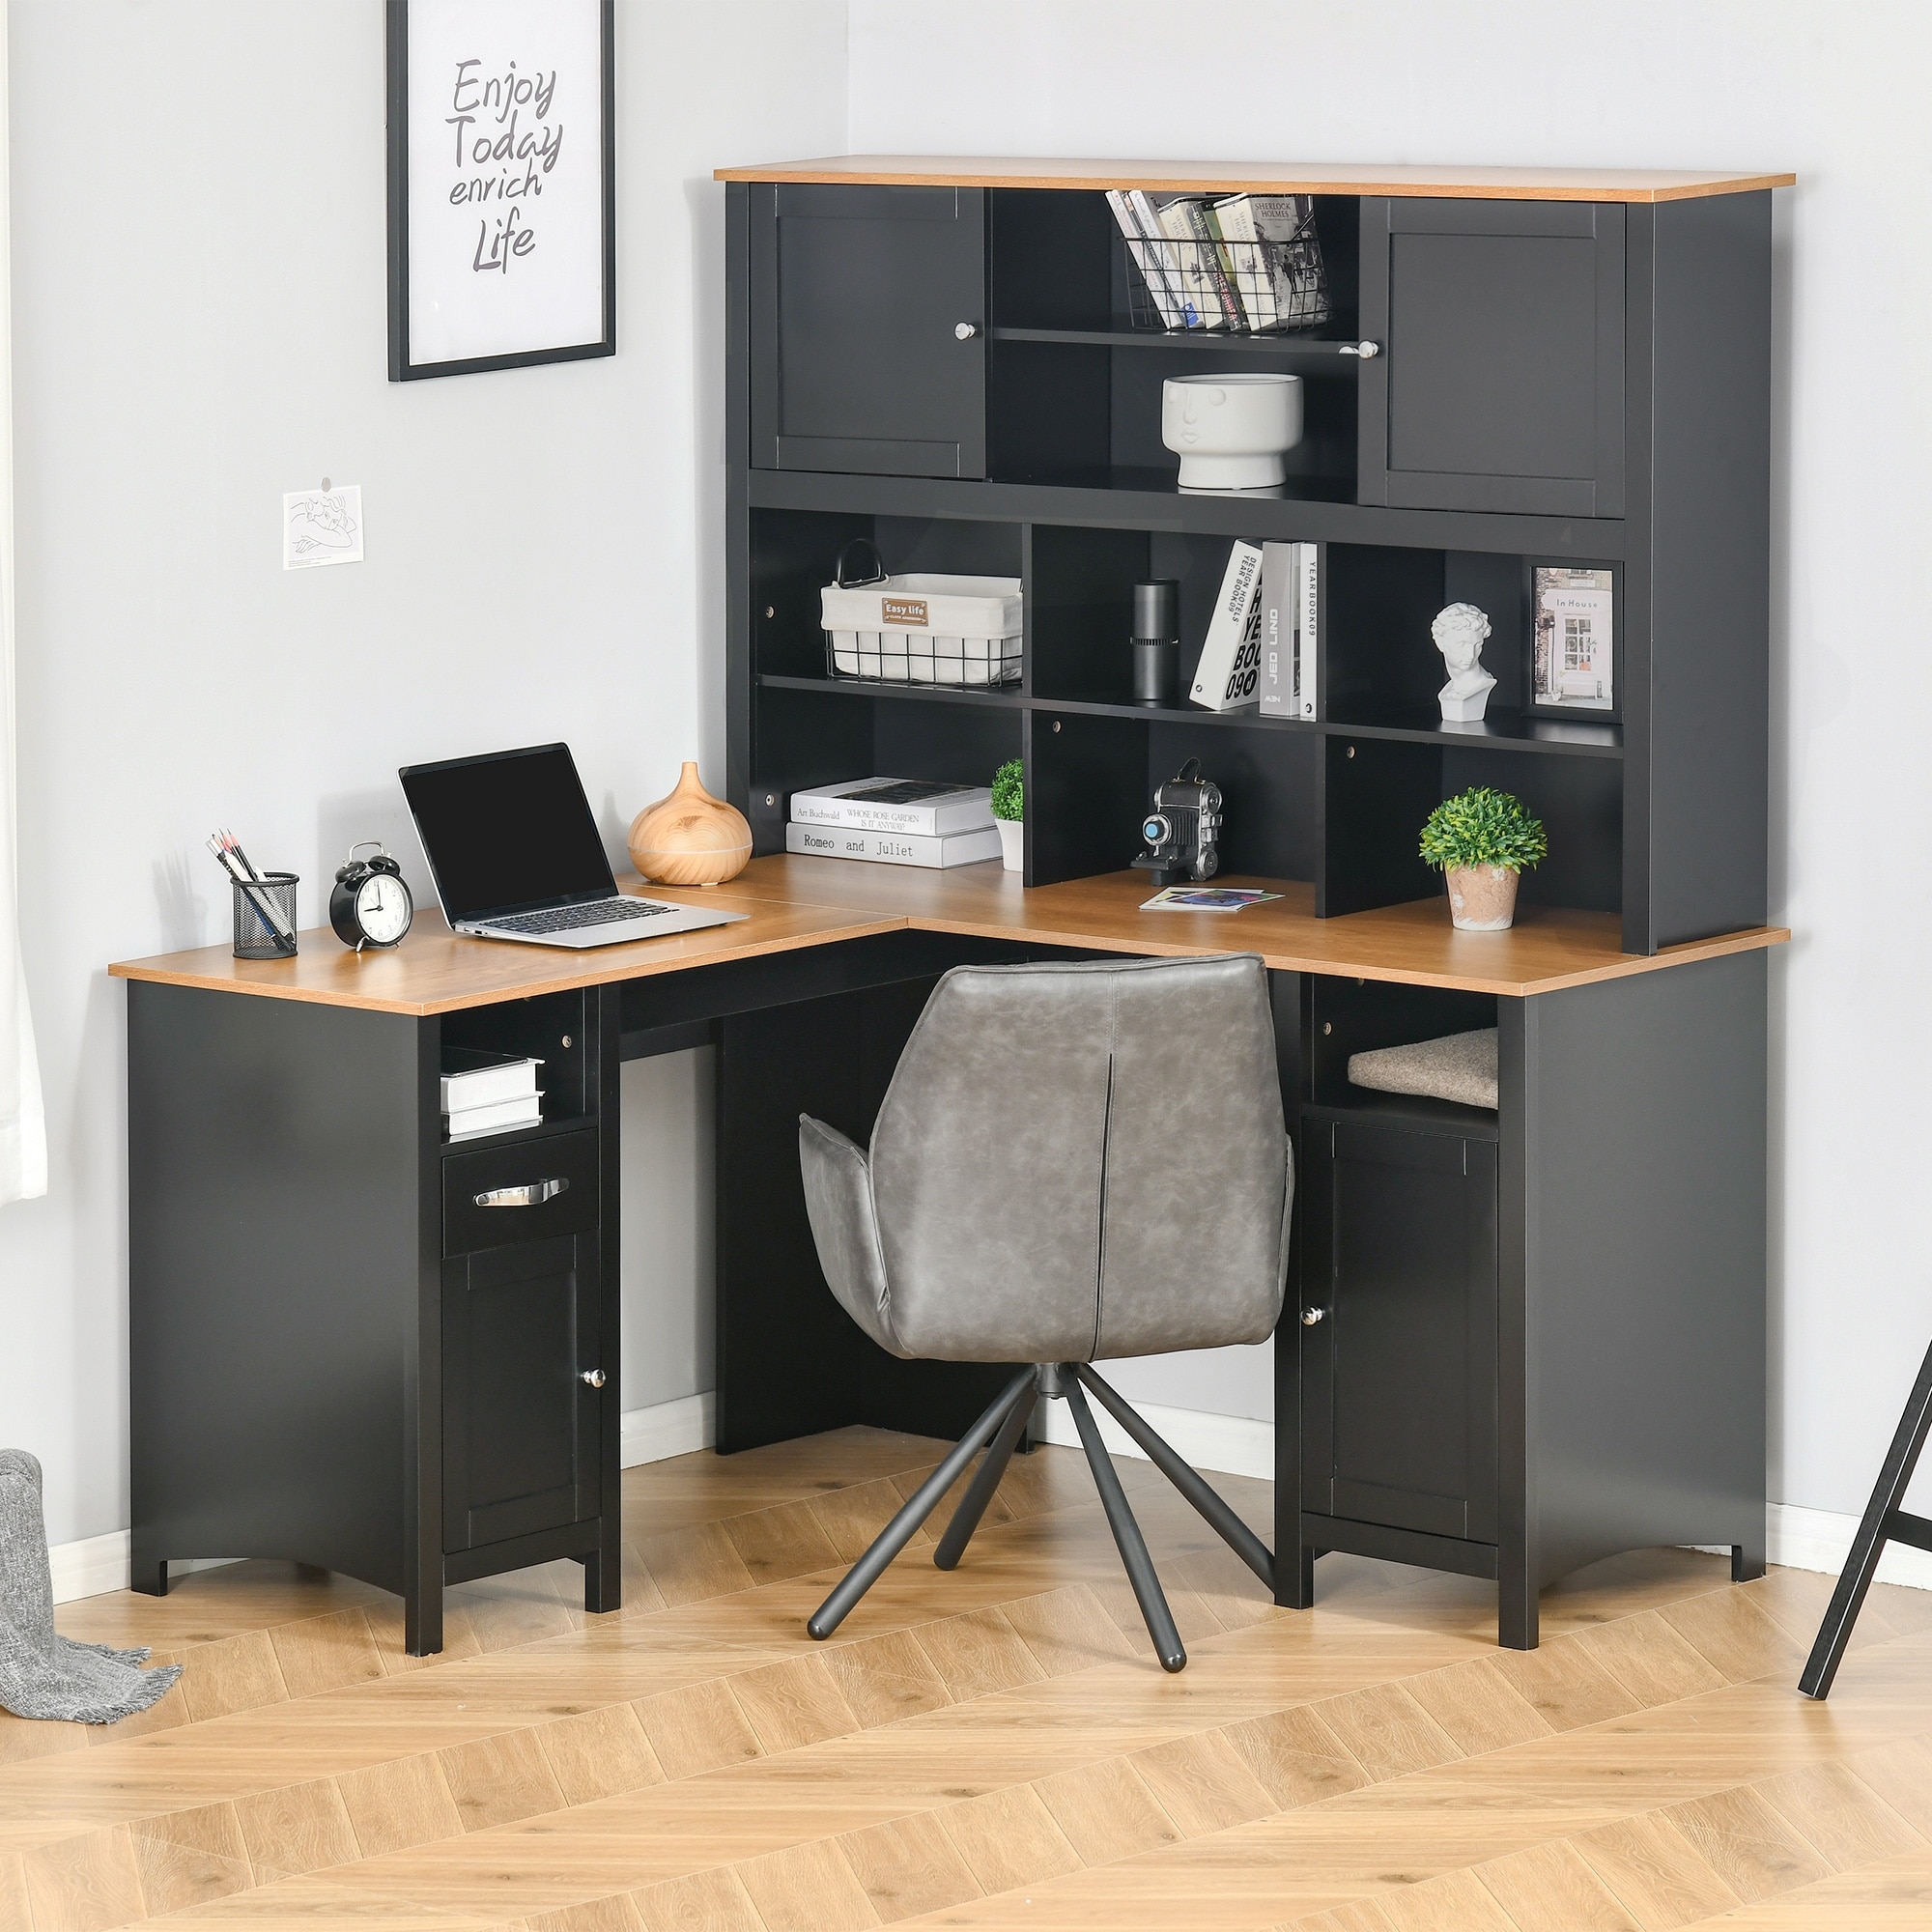 https://ak1.ostkcdn.com/images/products/is/images/direct/7b22ccf8169be7fcc7ecf02d5c7e4eeb4d4b2f20/HOMCOM-L-Shaped-Corner-Computer-Desk-with-Hutch%2C-Home-Office-Desk-Study-Workstation-Table.jpg